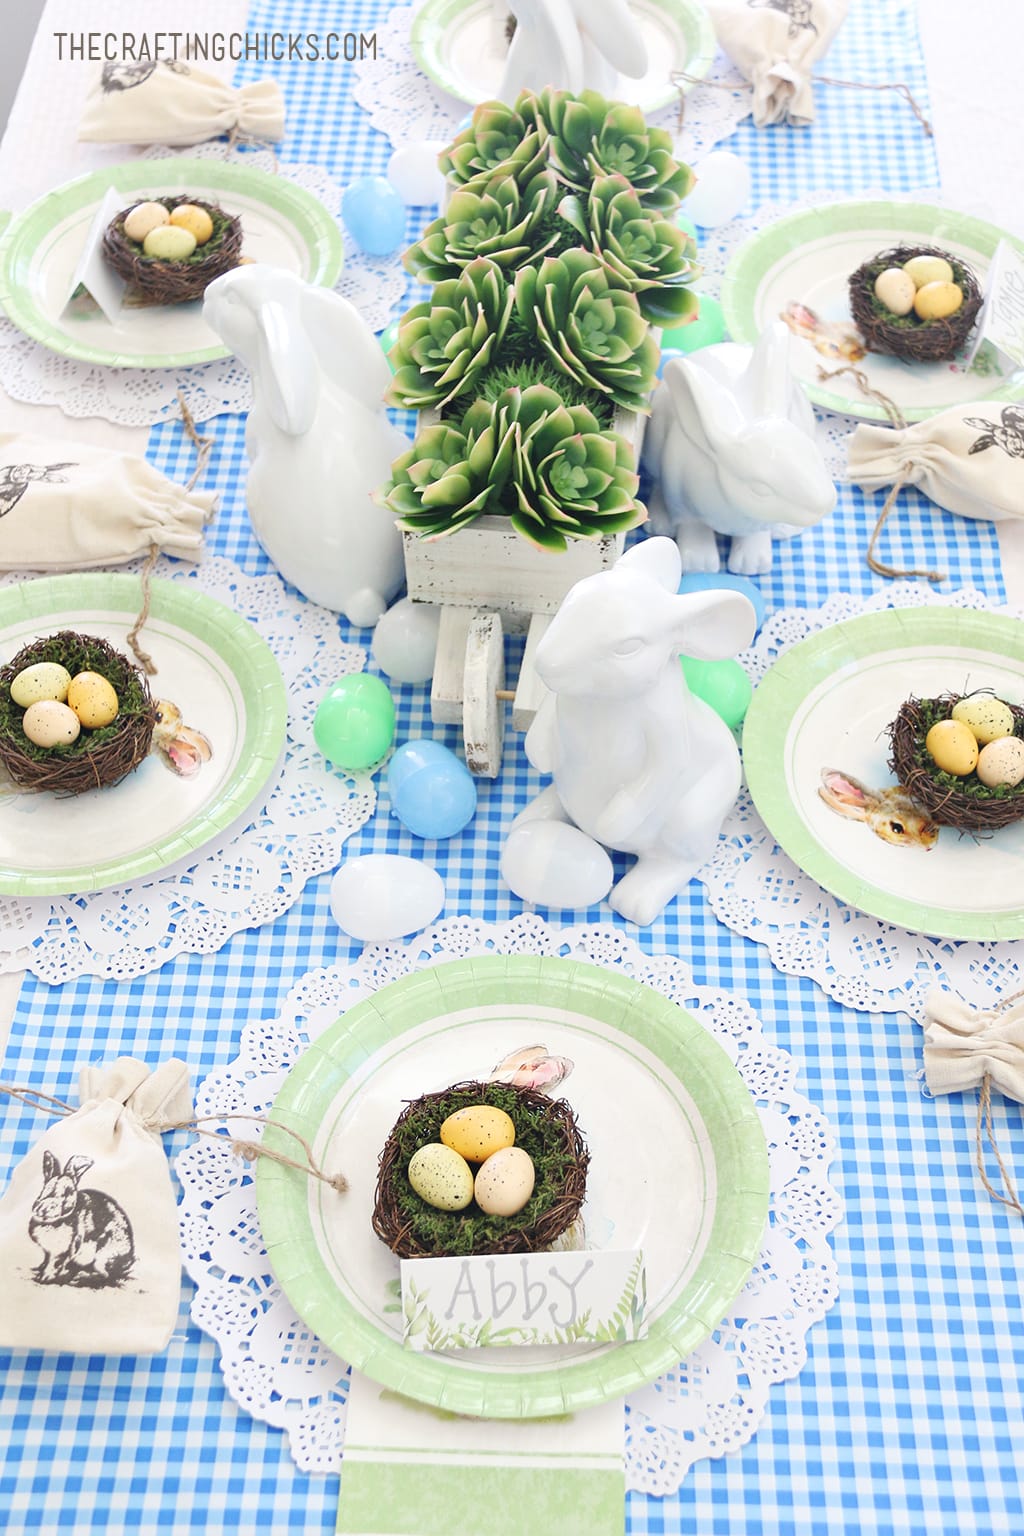 Easter Kid Table Place Settings for Easter Brunch or Dinner. Kids will love these adorable Easter Table Place Settings. Sweet touches for a sweet day!